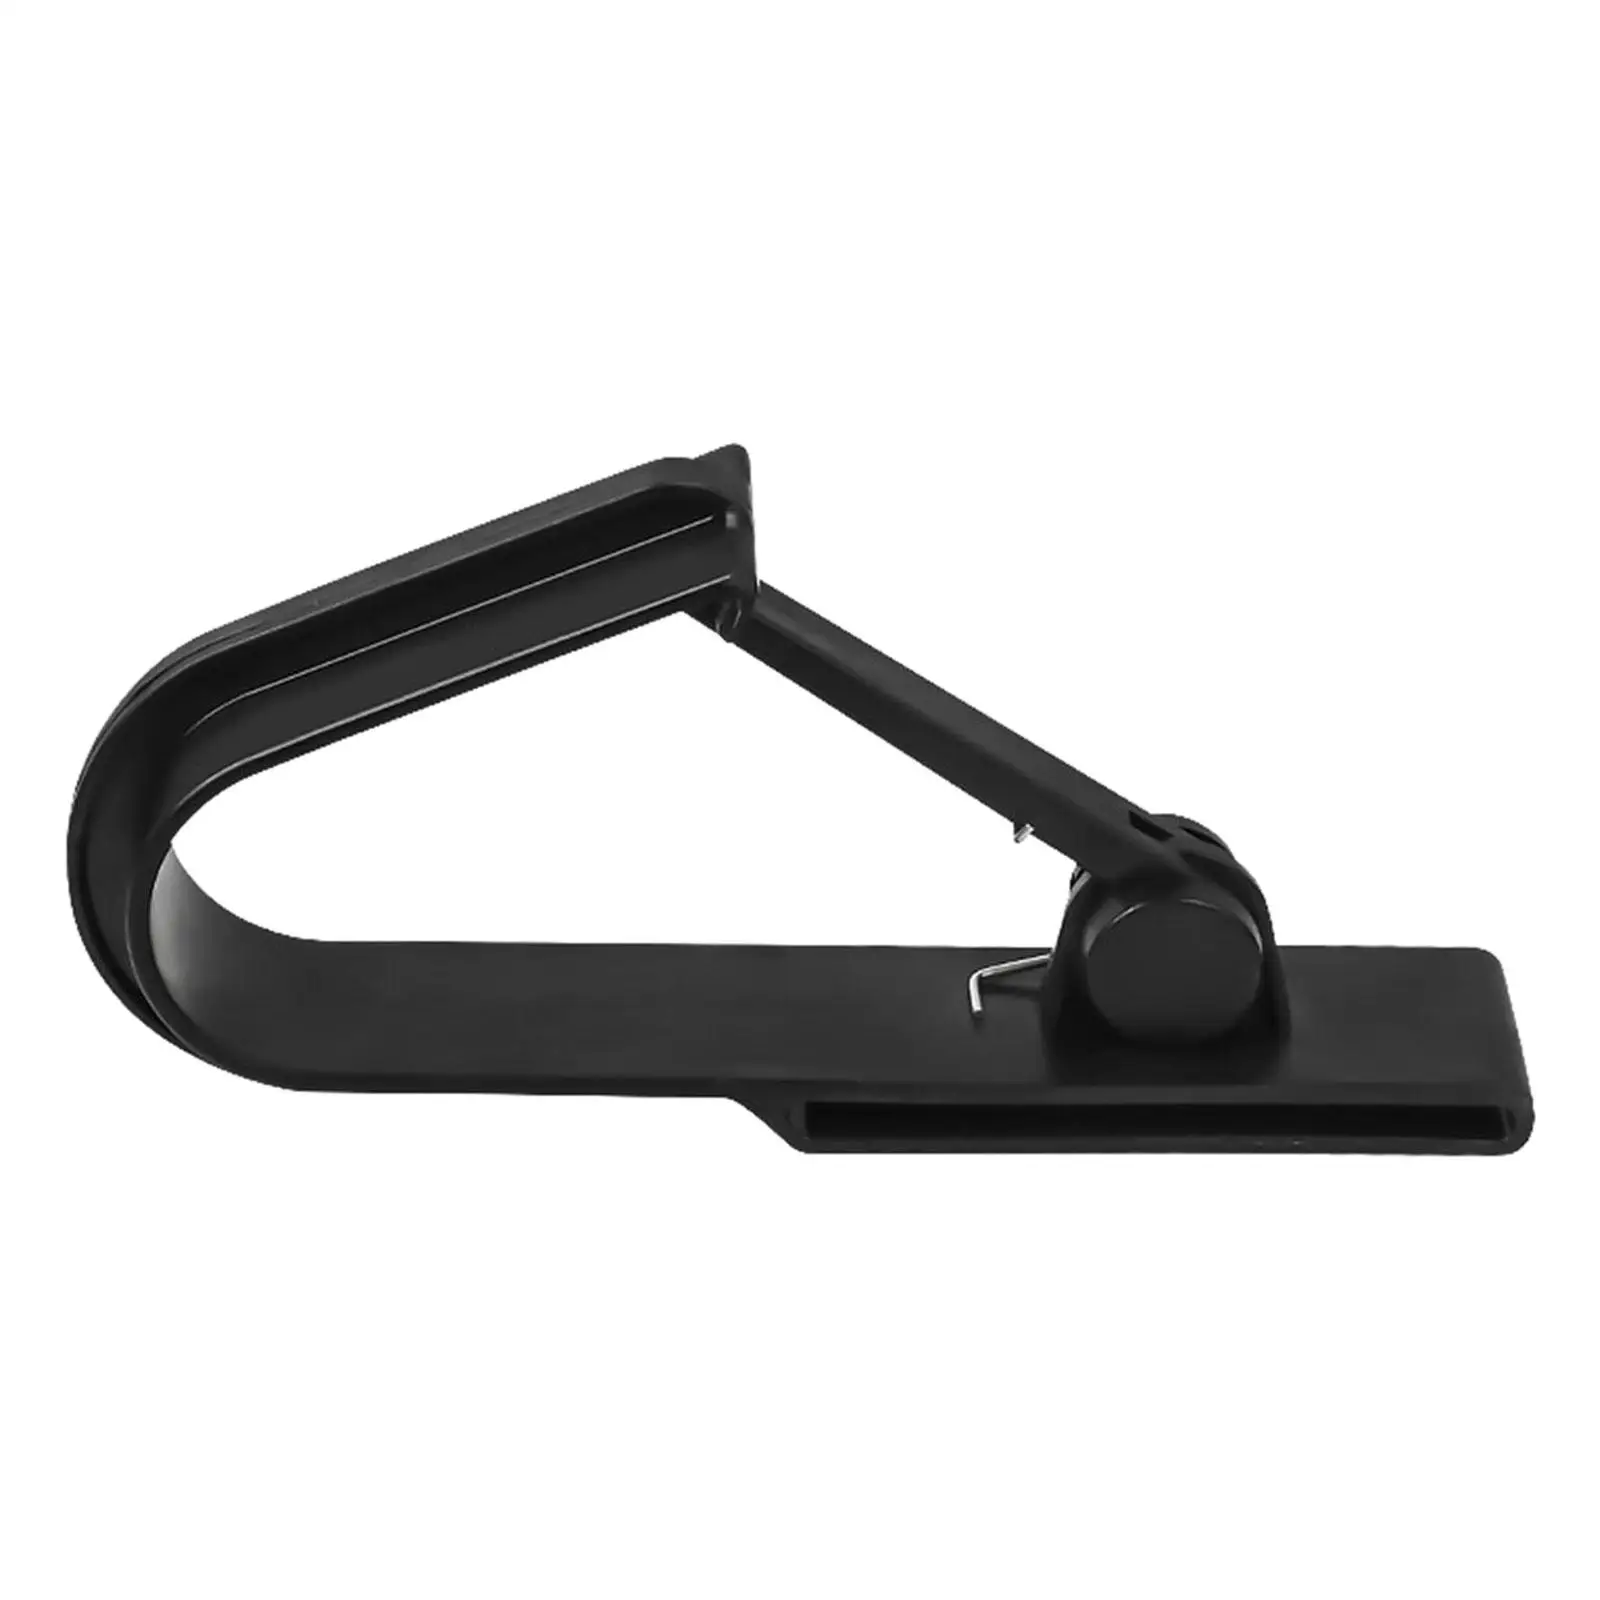 Belt Clip Tool Hooks Tool Holder Strong Bearing Capacity for Furniture Hardware Worker Woodworking